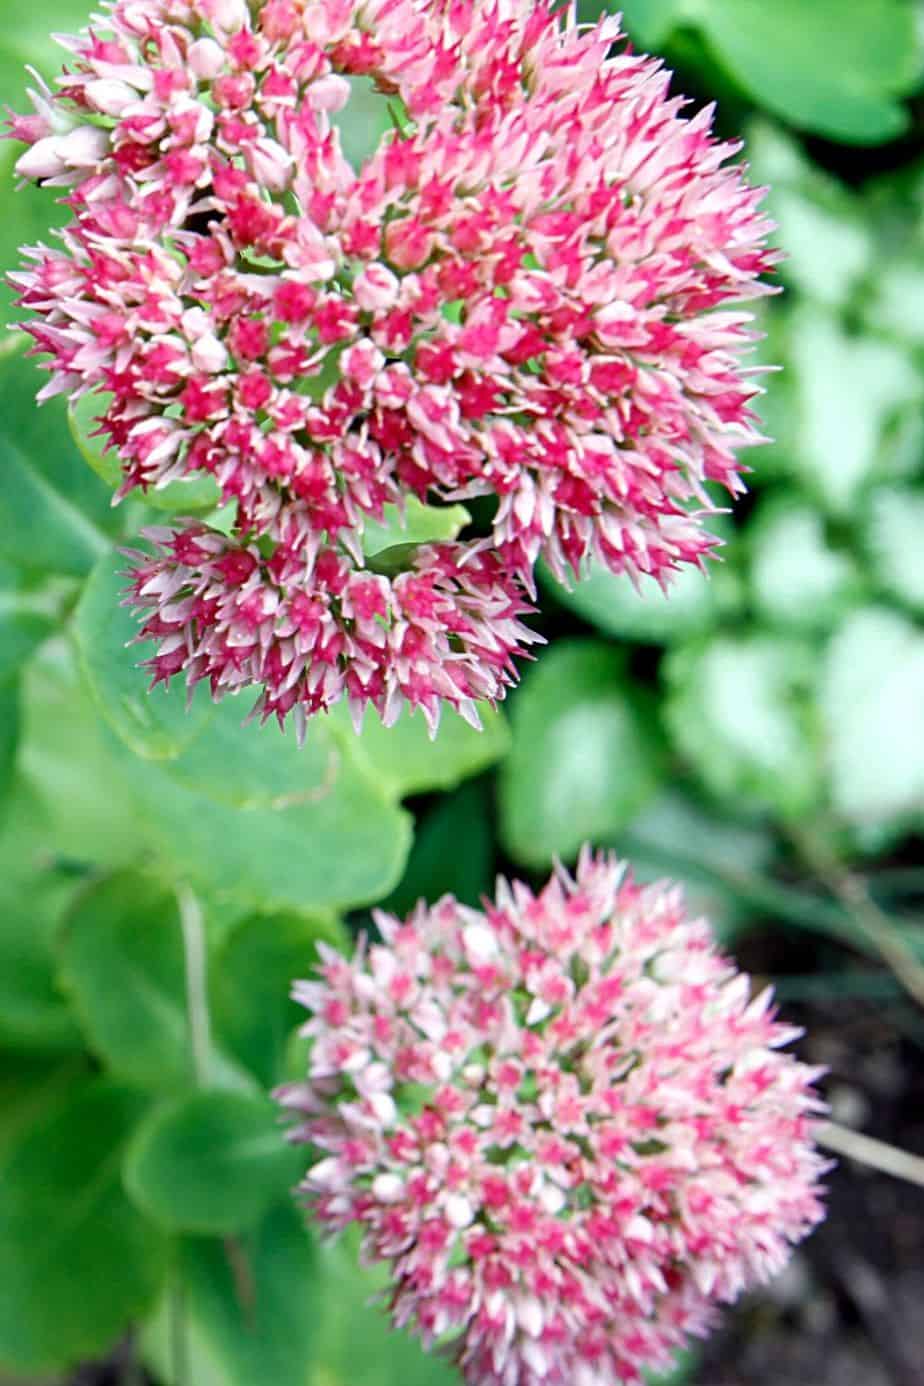 Sedums come in various shapes and designs that thrive best in a southwest facing garden